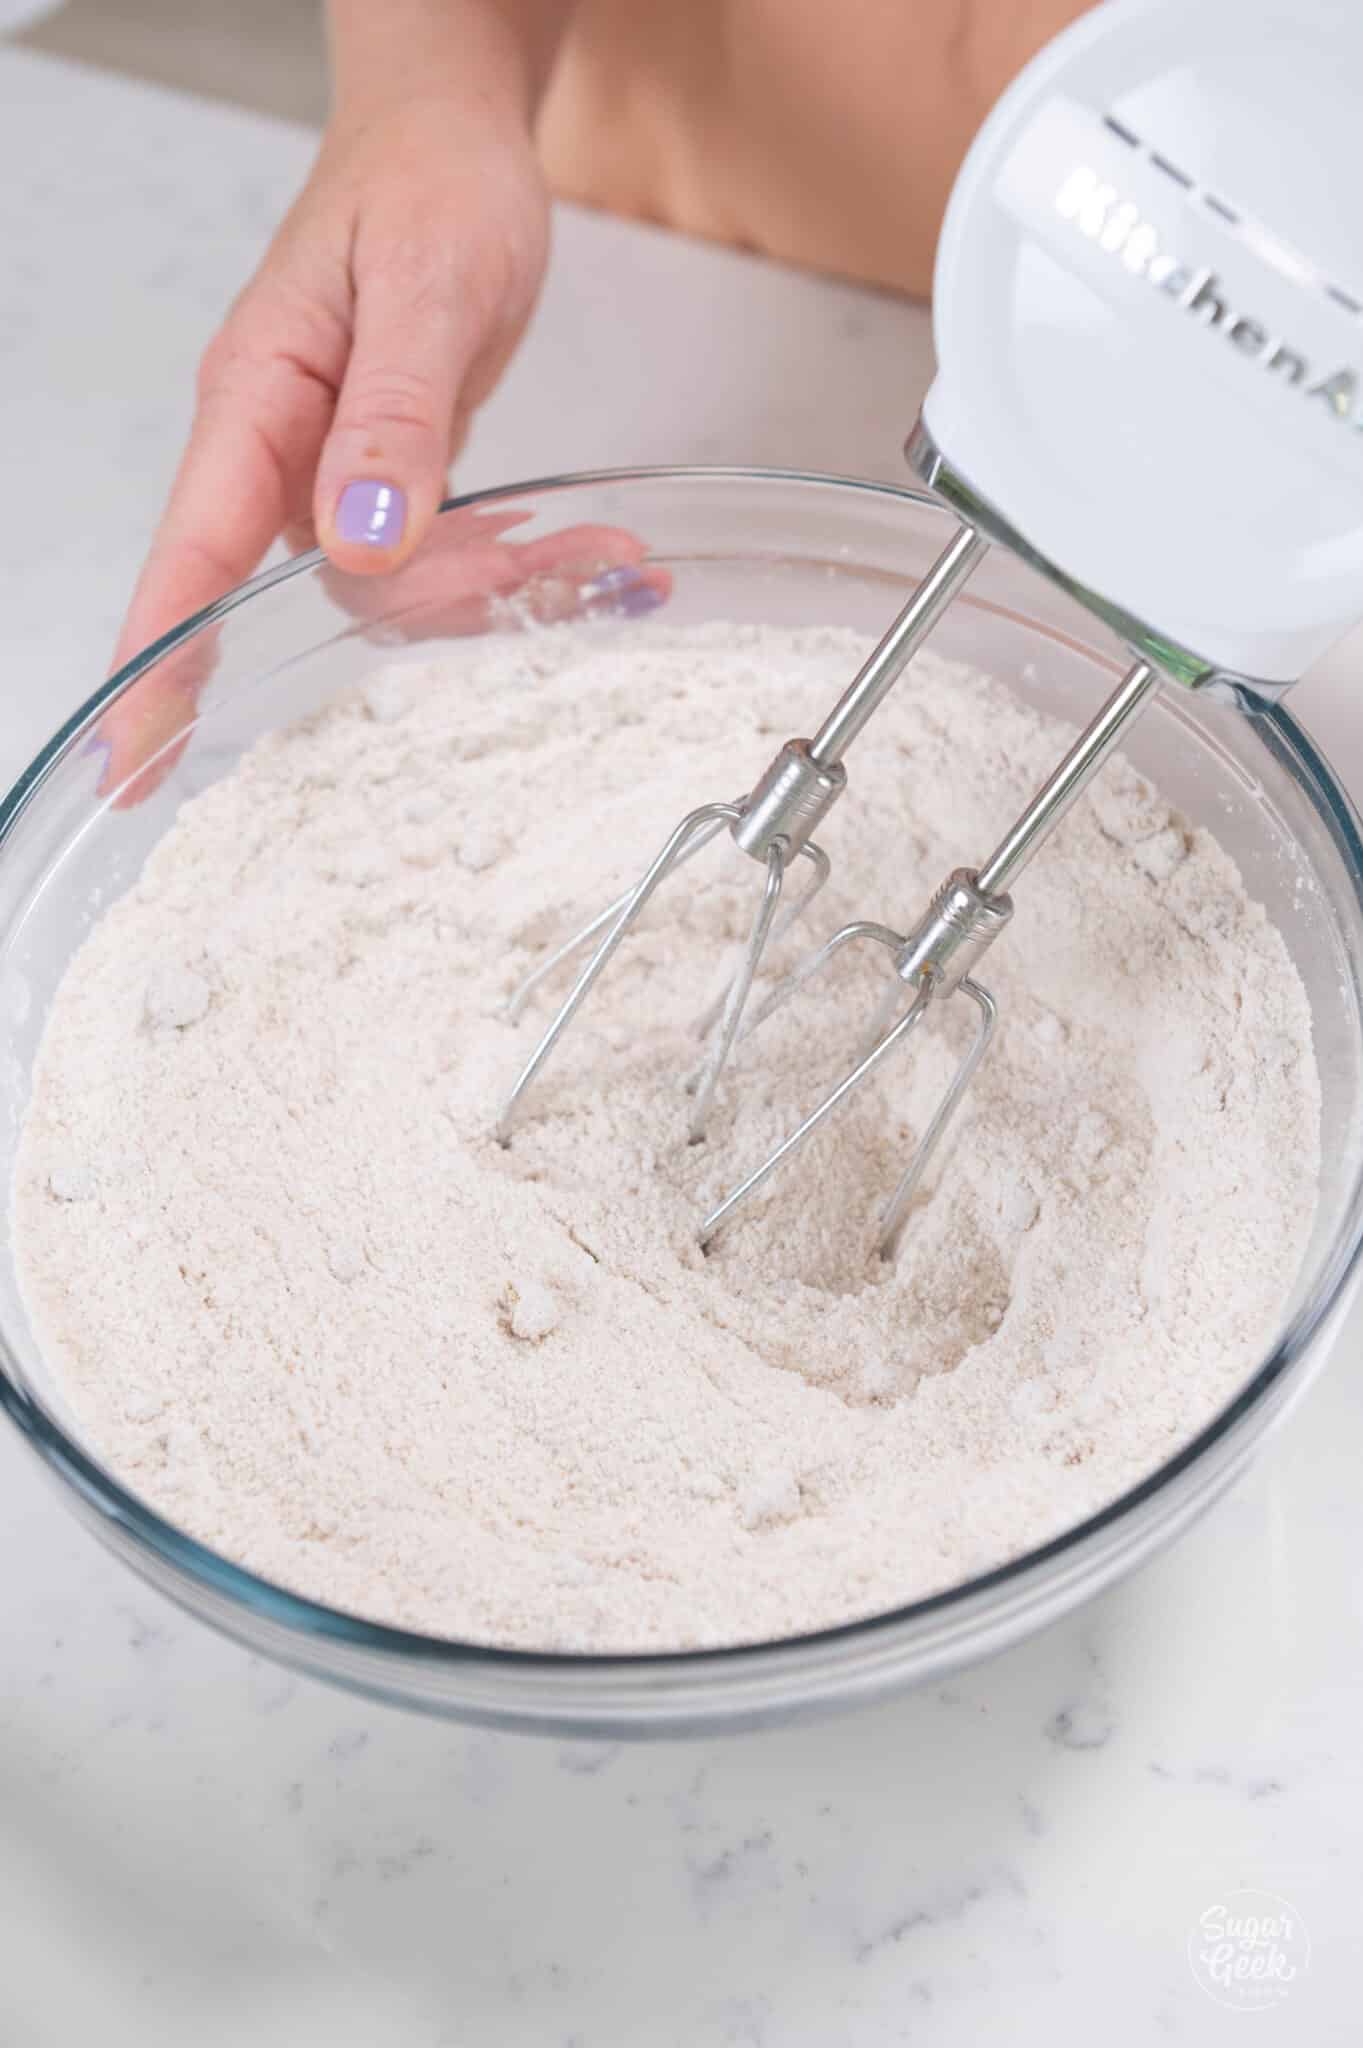 hands using hand mixer to whisk dry ingredients in bowl.